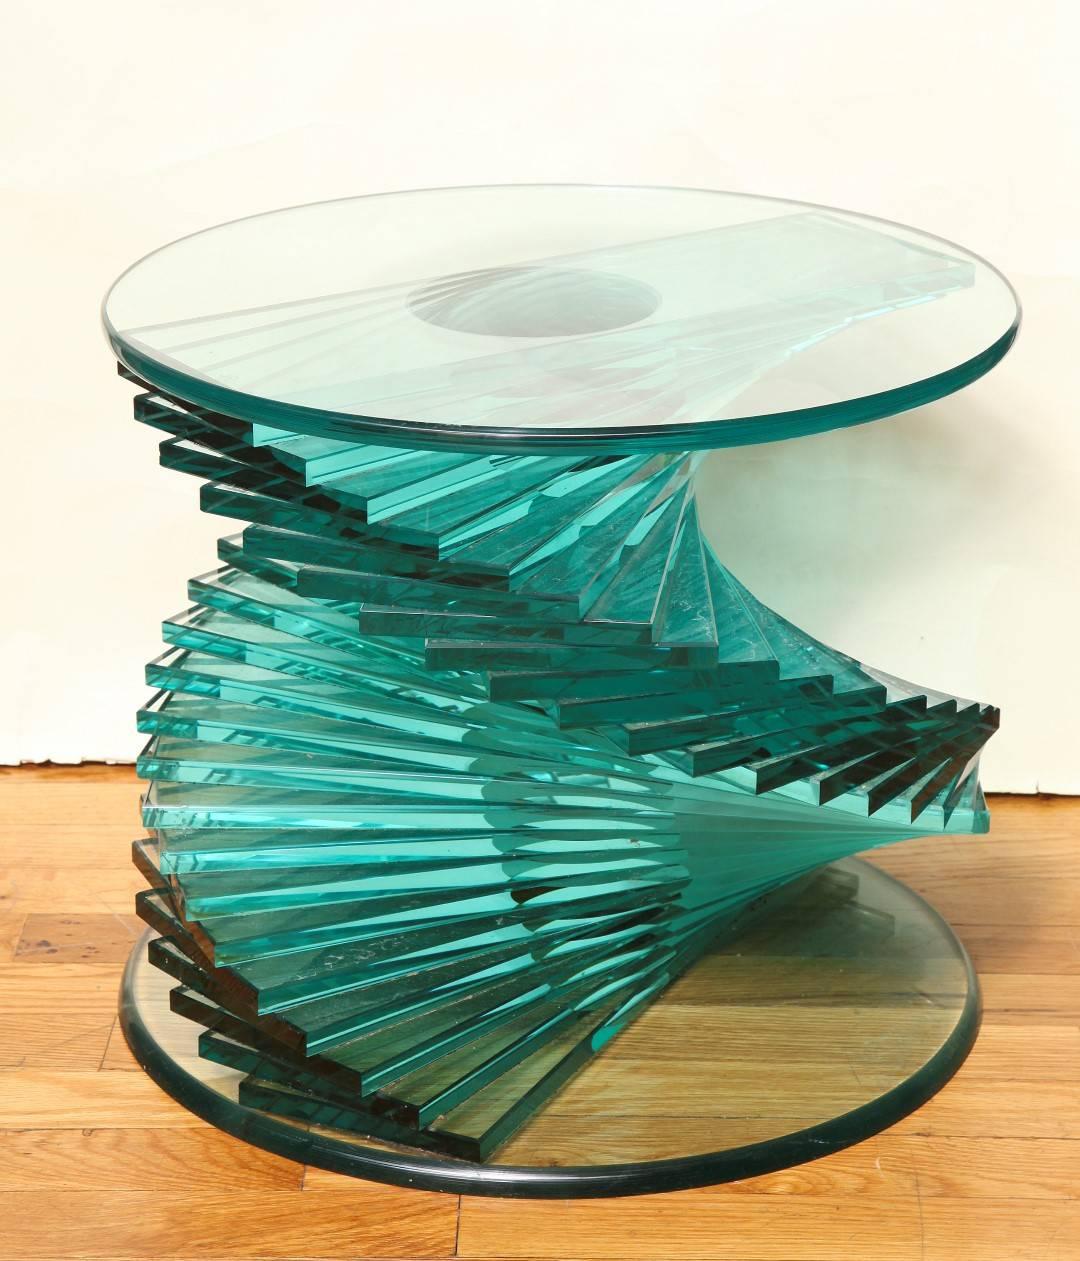 A side table designed with stacked sections of class spiraling from round base to round top with polished edge. 